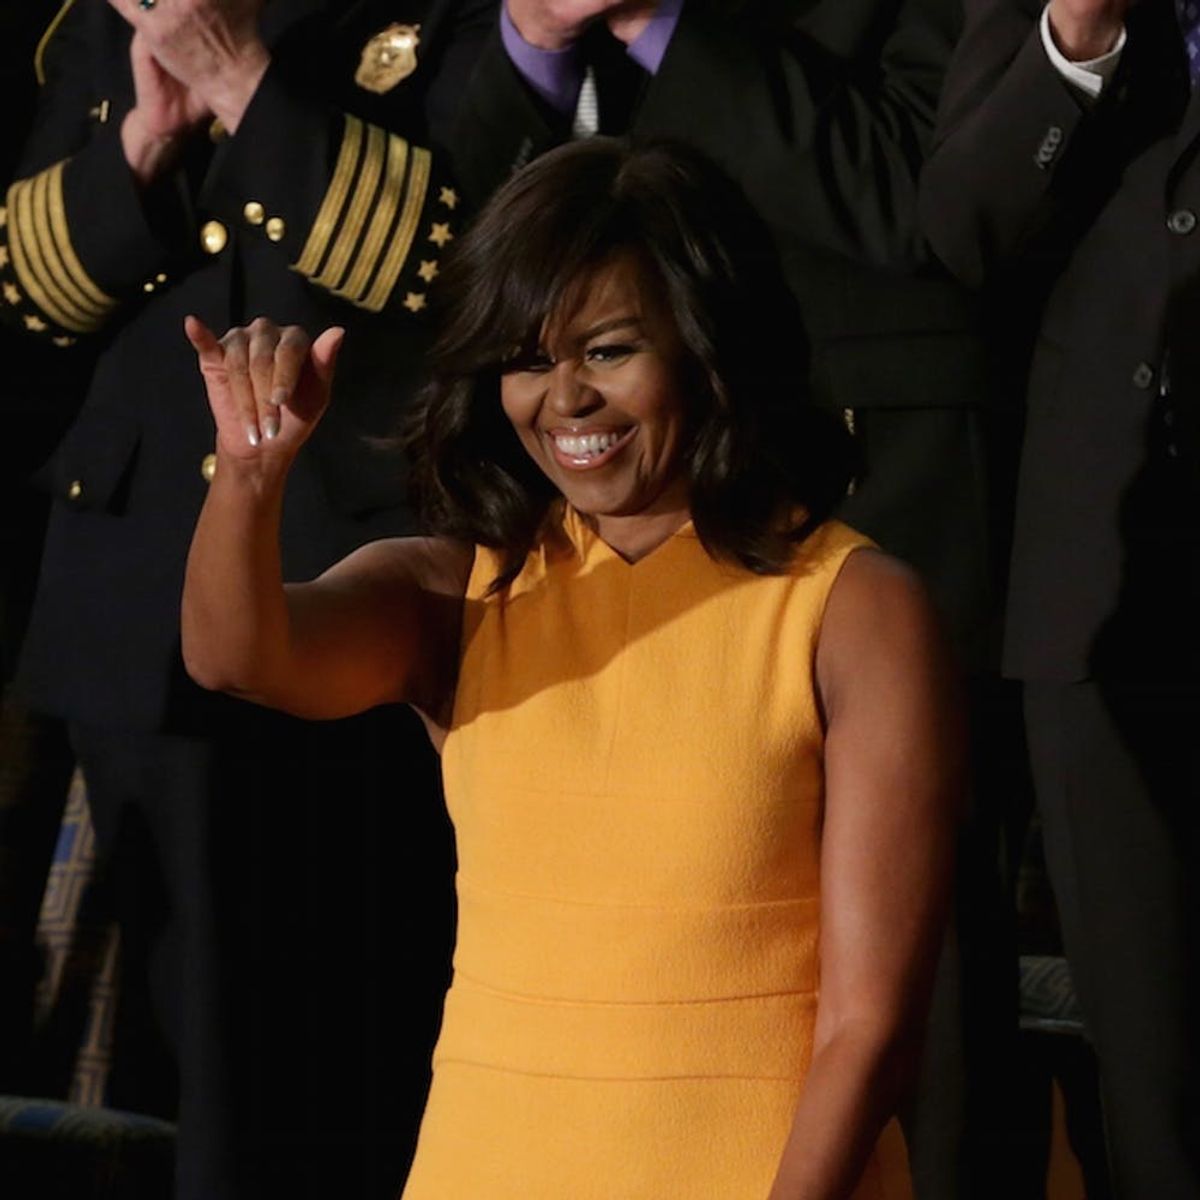 Michelle Obama Was the Real Star of the State of the Union in This Stunning Dress